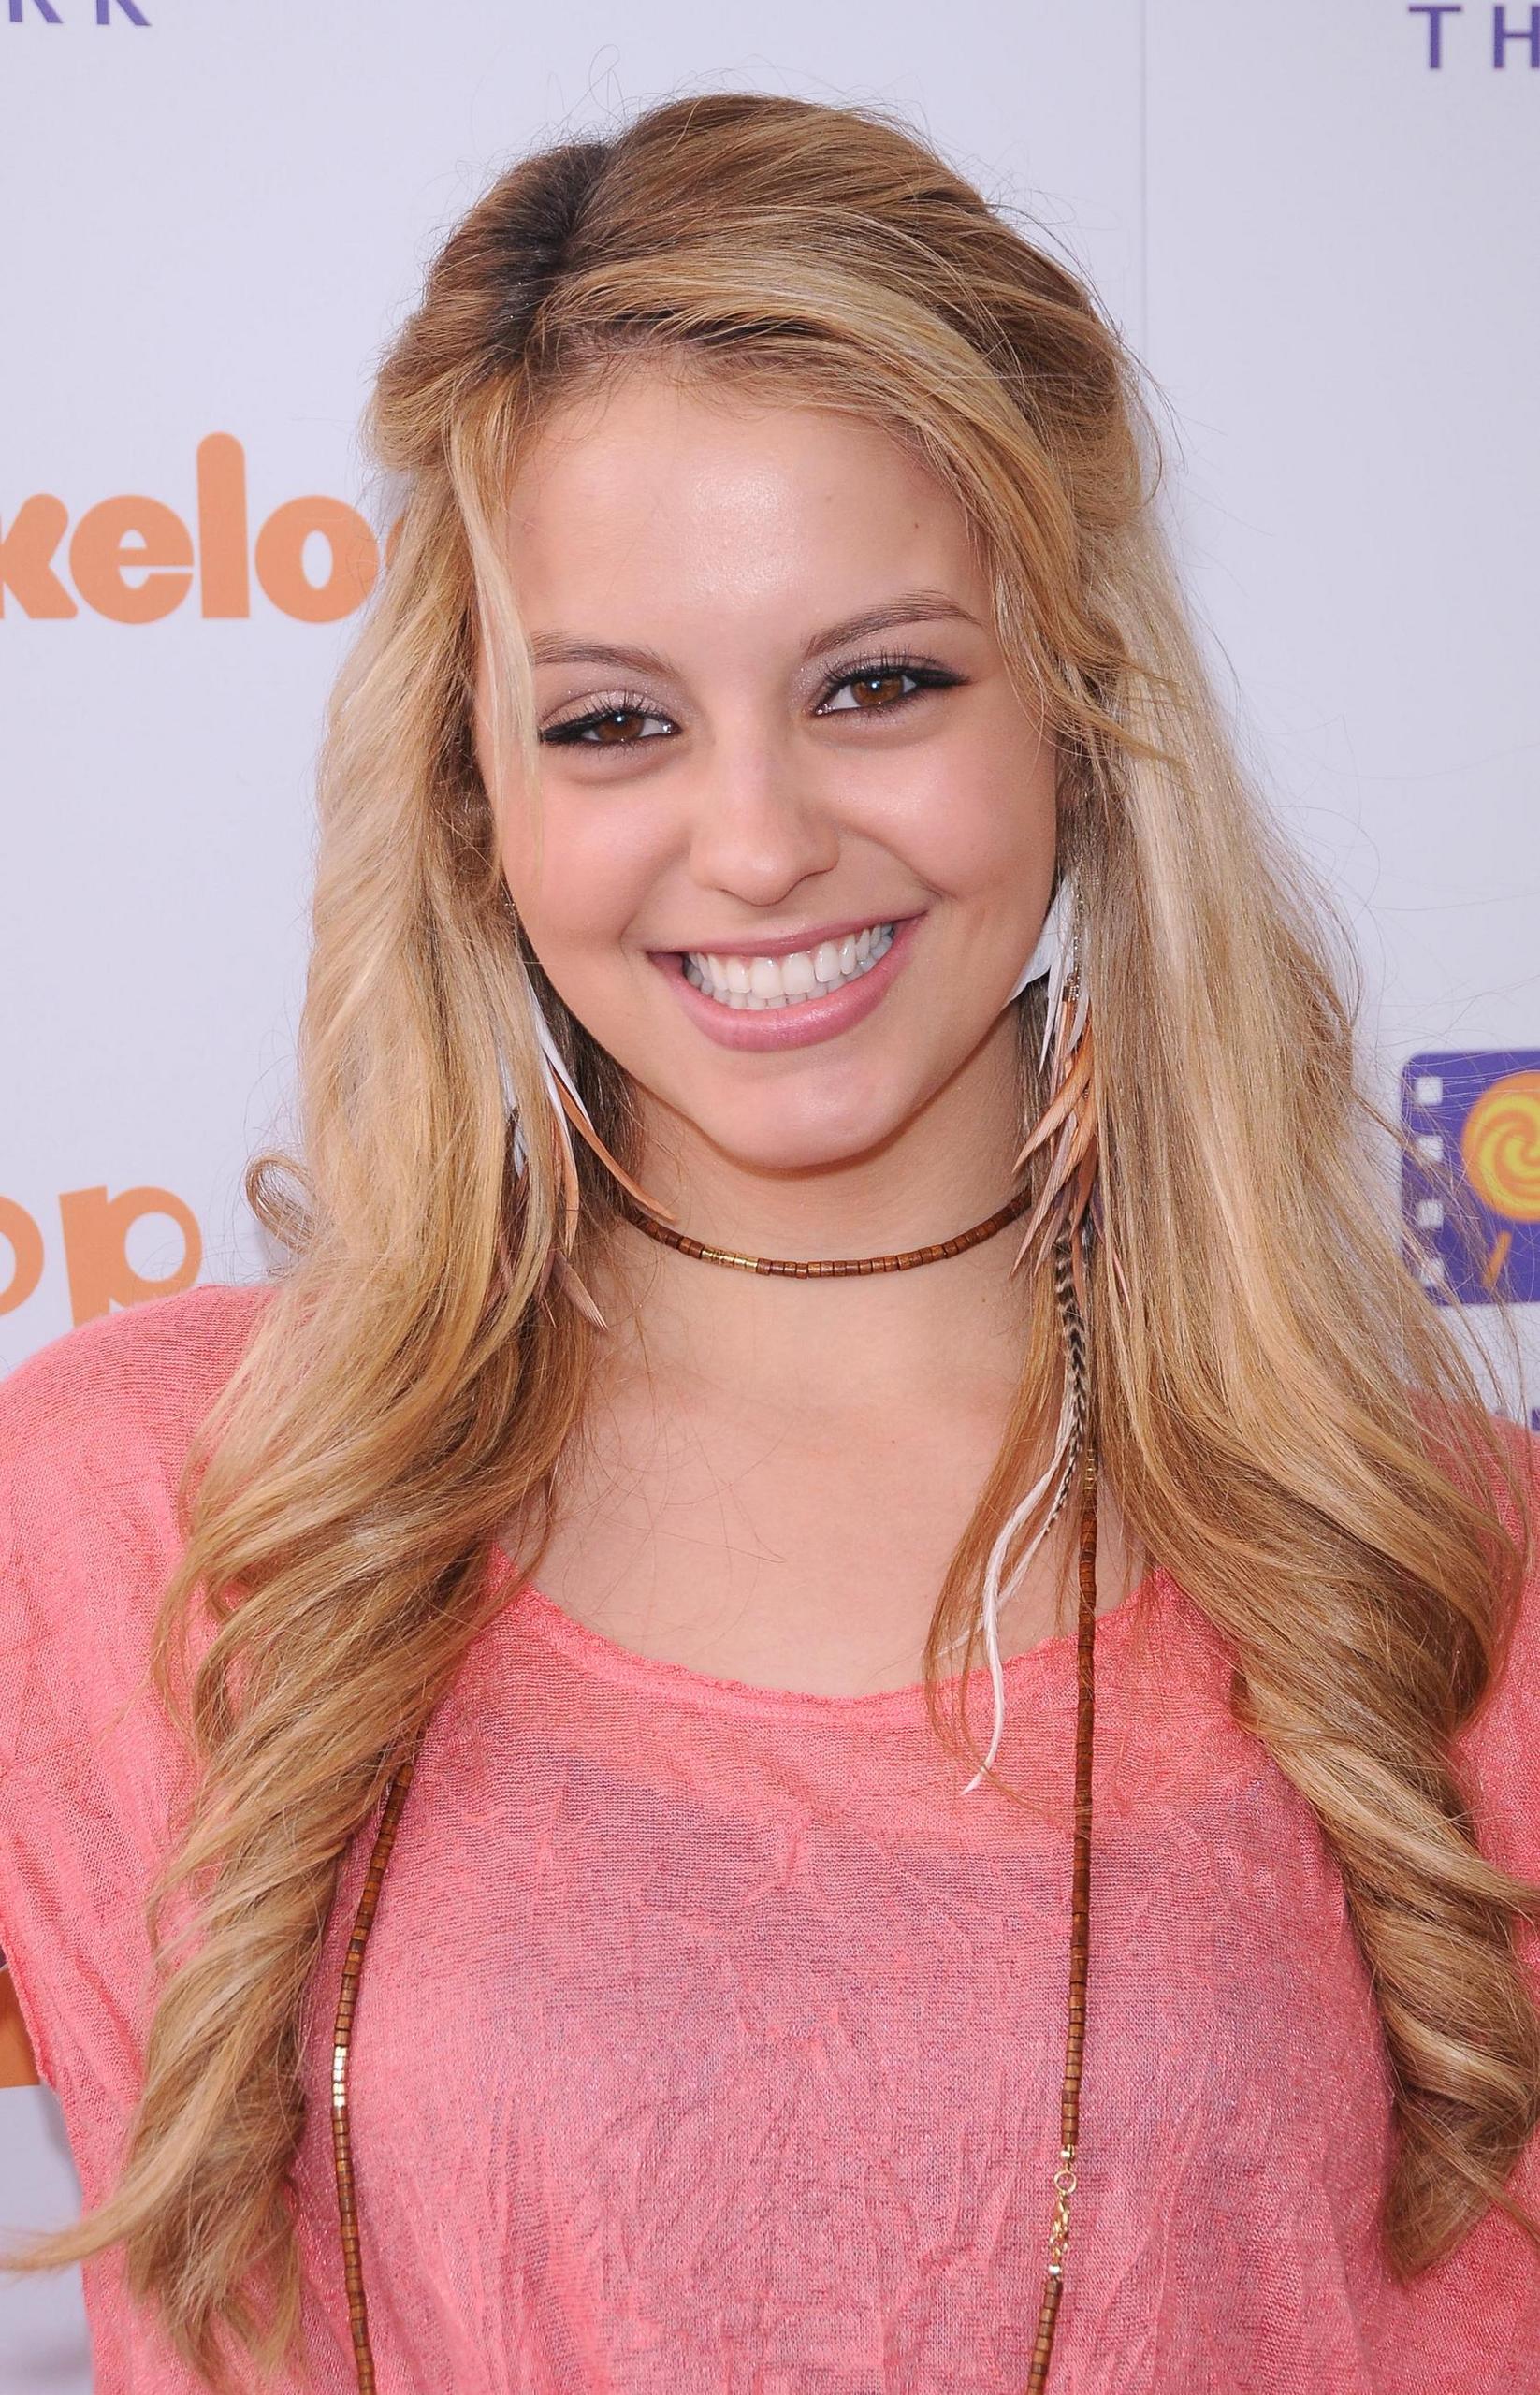 Lollipop Theater Networks 3rd Annual Game Day - gage-golightly Photo - Lollipop-Theater-Networks-3rd-Annual-Game-Day-gage-golightly-31759127-1646-2560